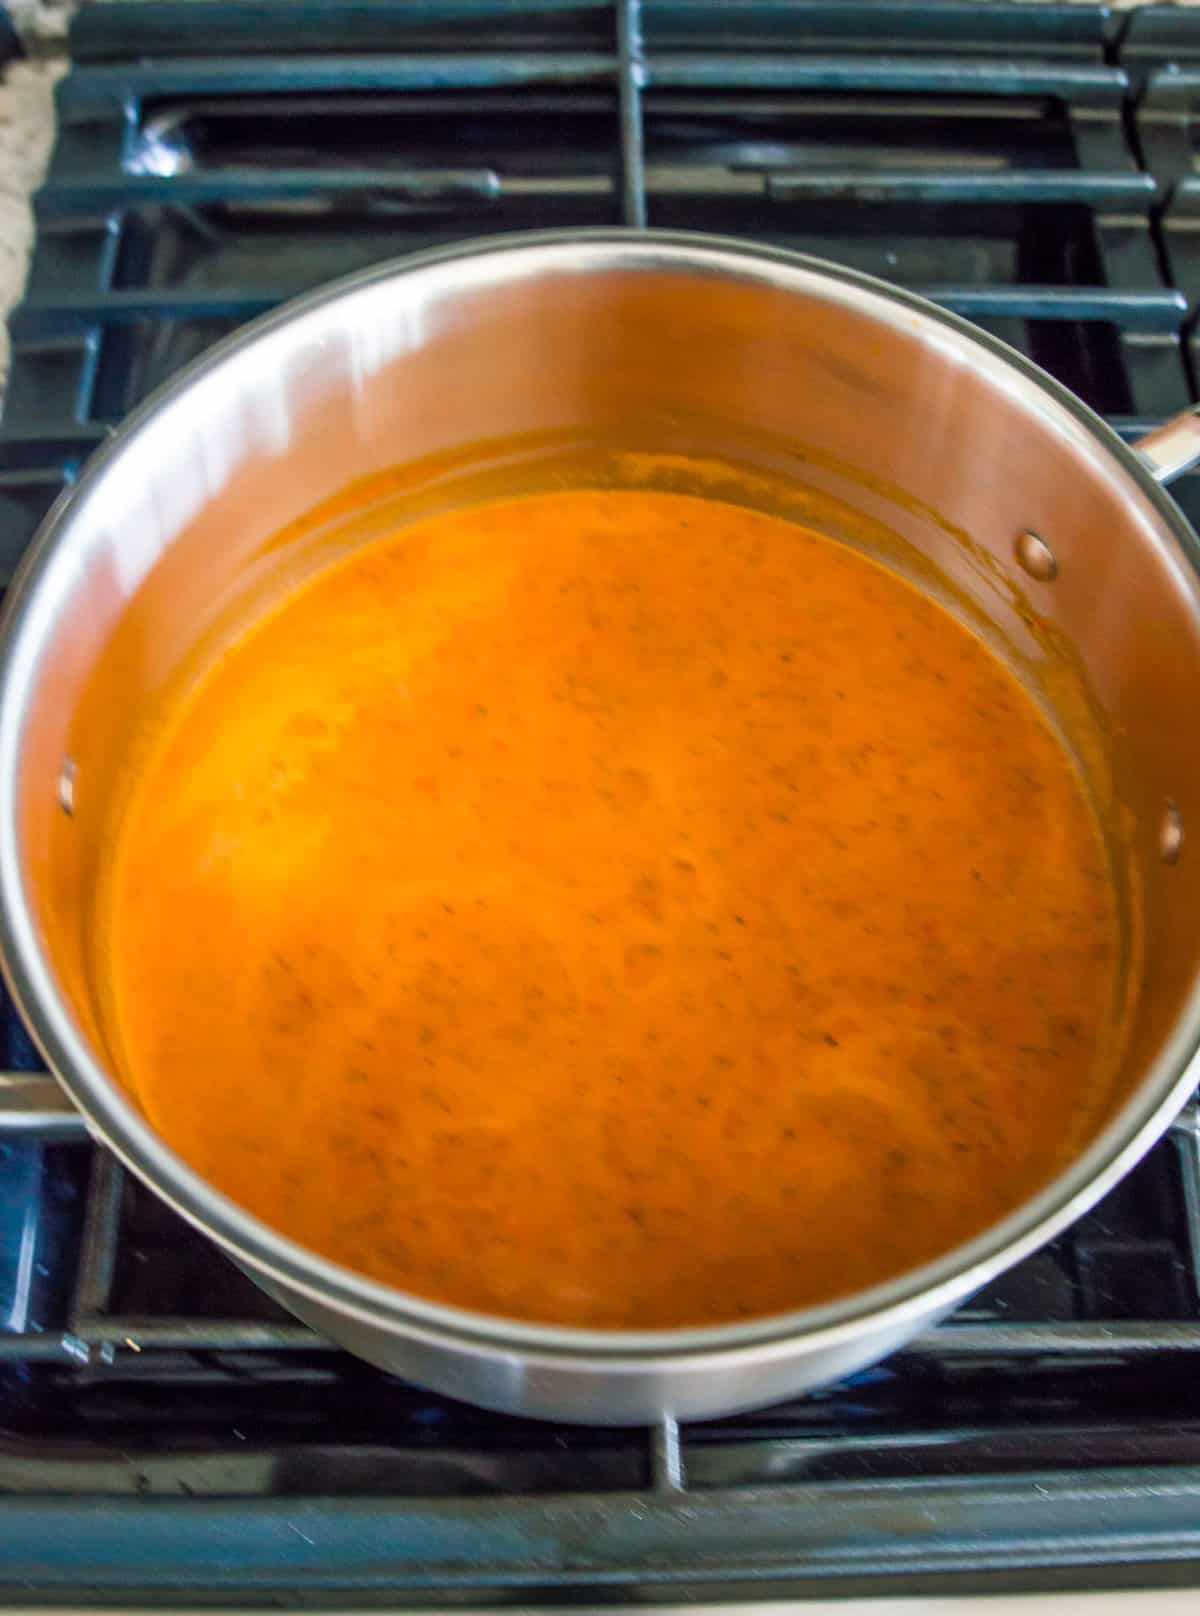 A tomato soup boiling in a pot on the stovetop.